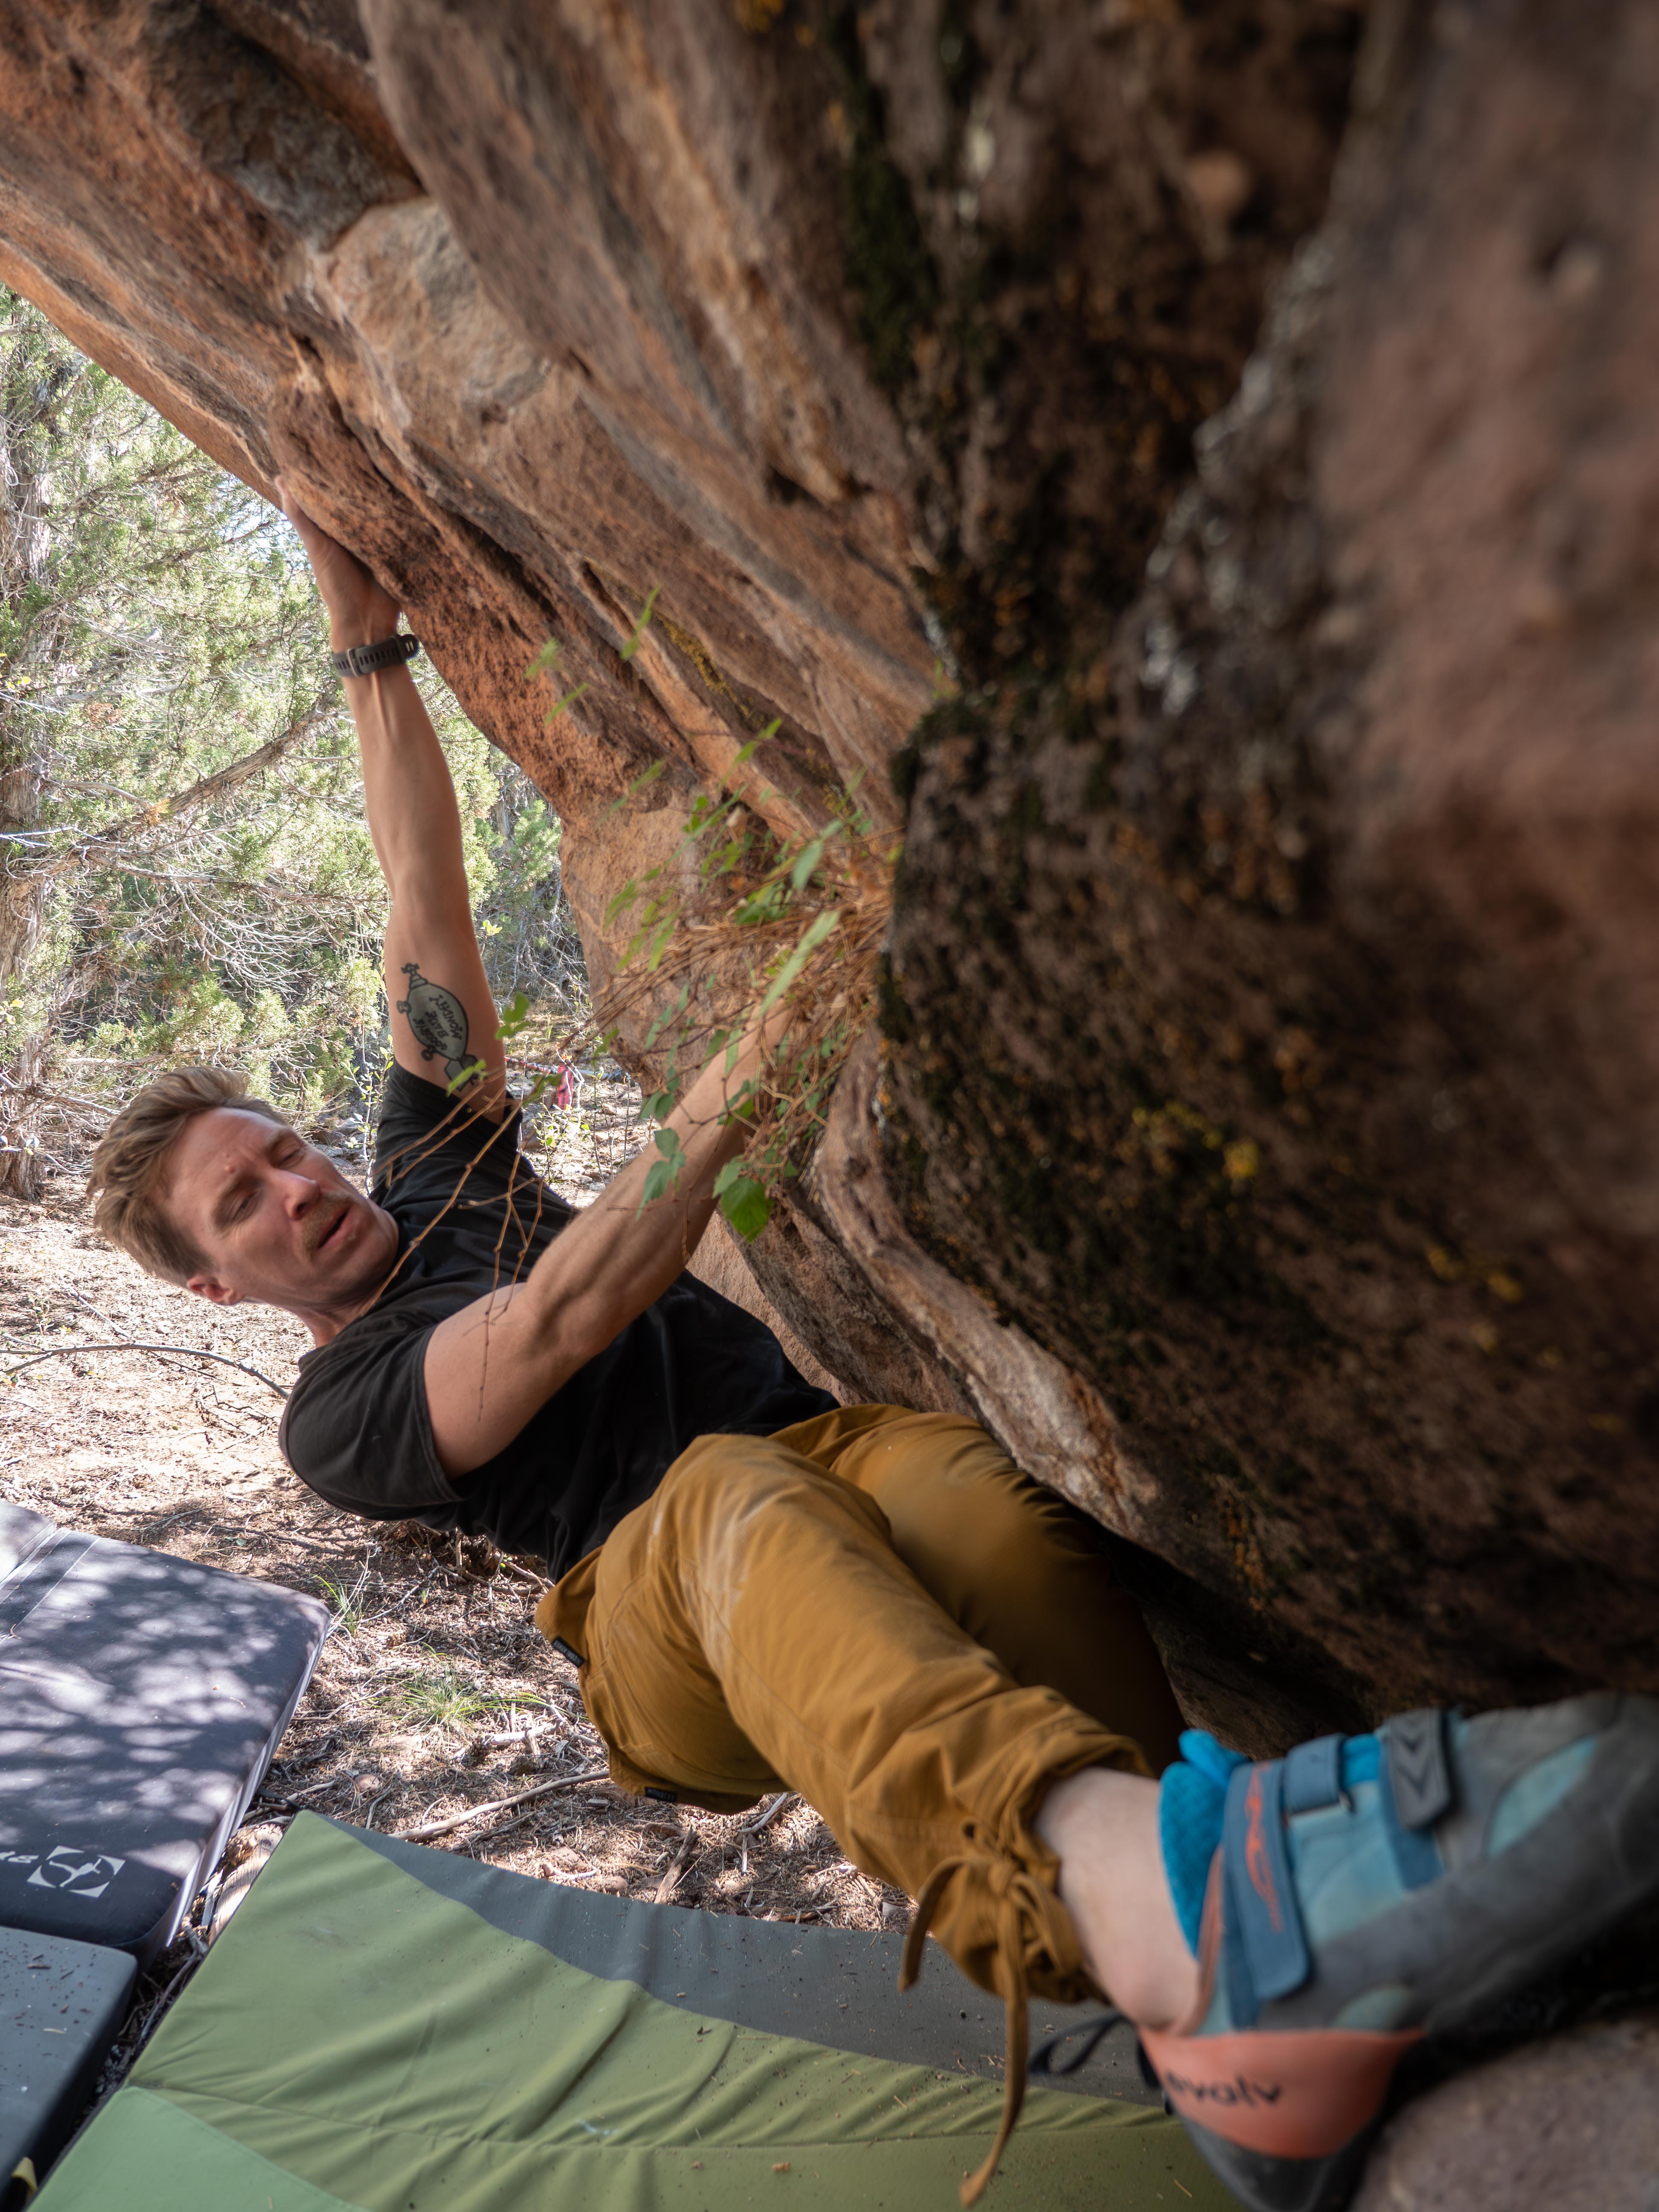 Bouldering Is Catching Fire in Flaming Gorge